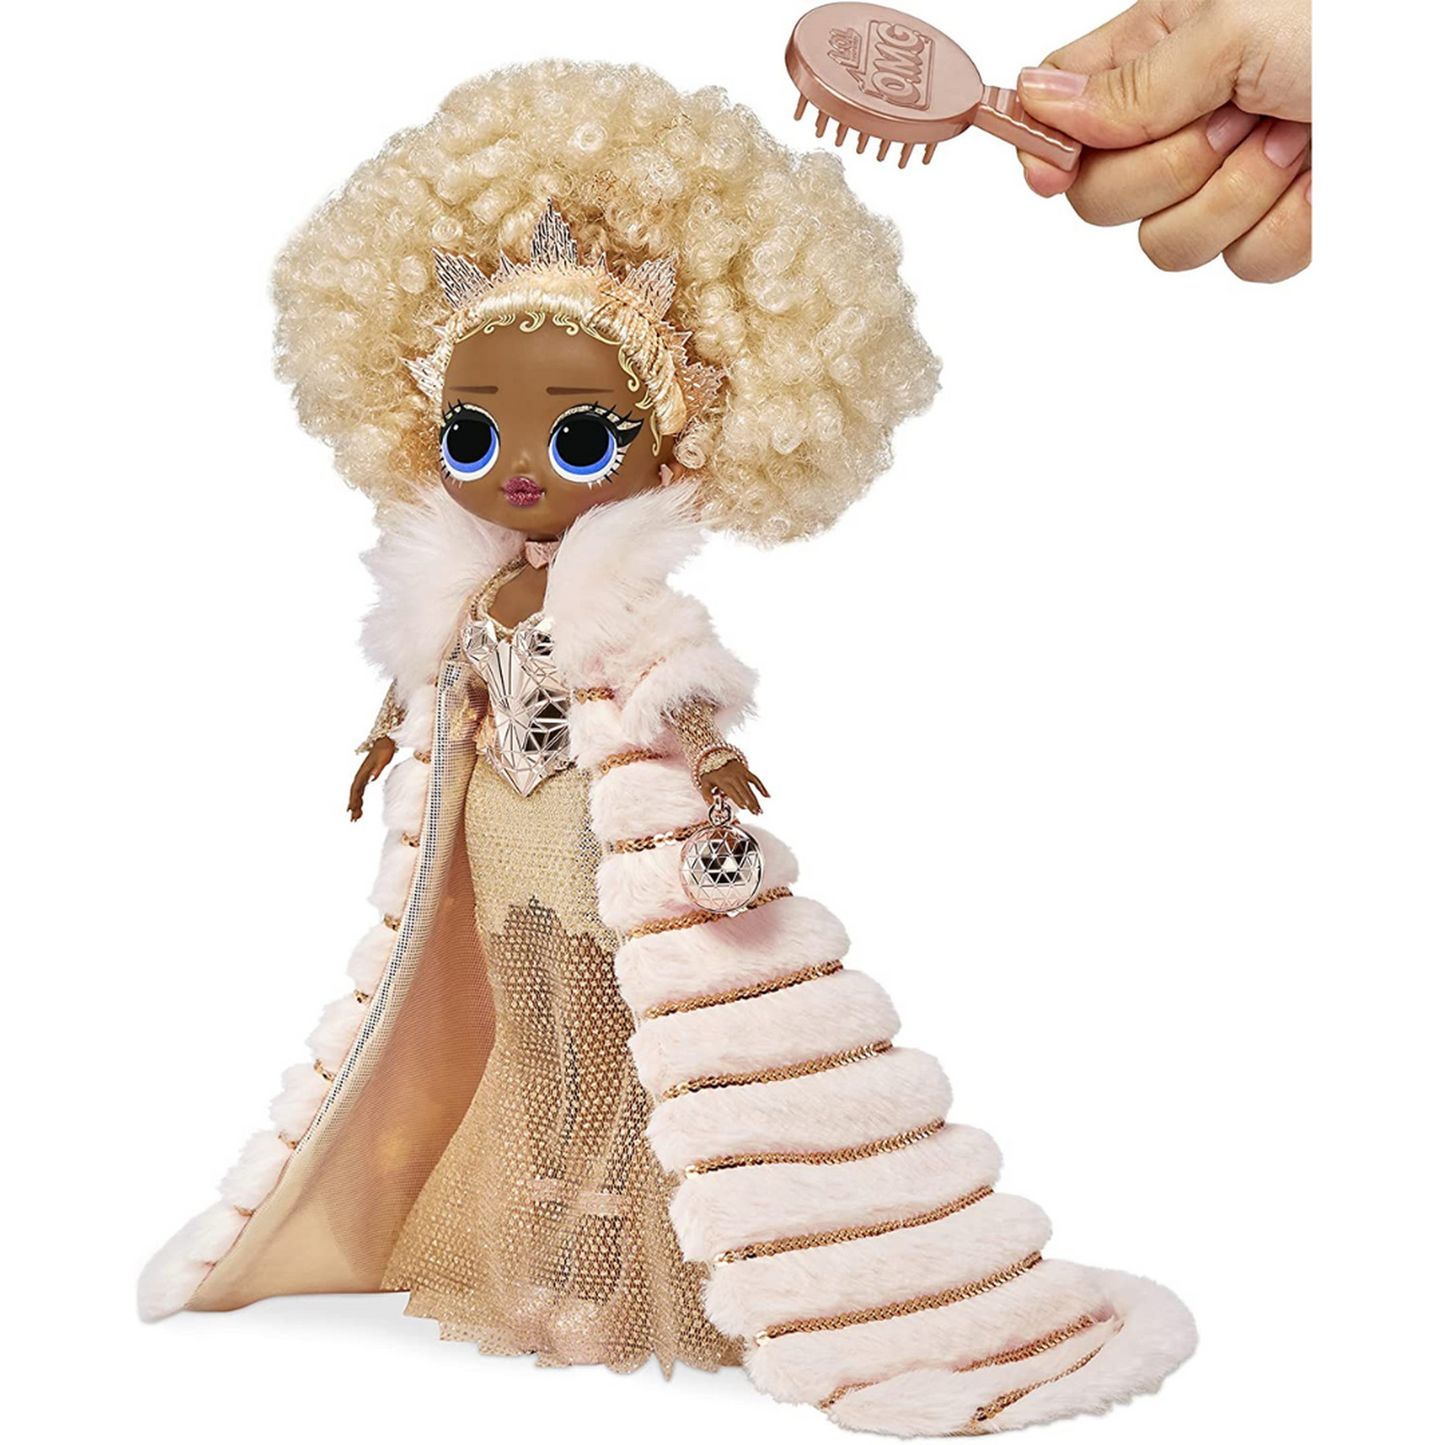 L.O.L. Surprise! Holiday O.M.G. 2021 Collector NYE Queen